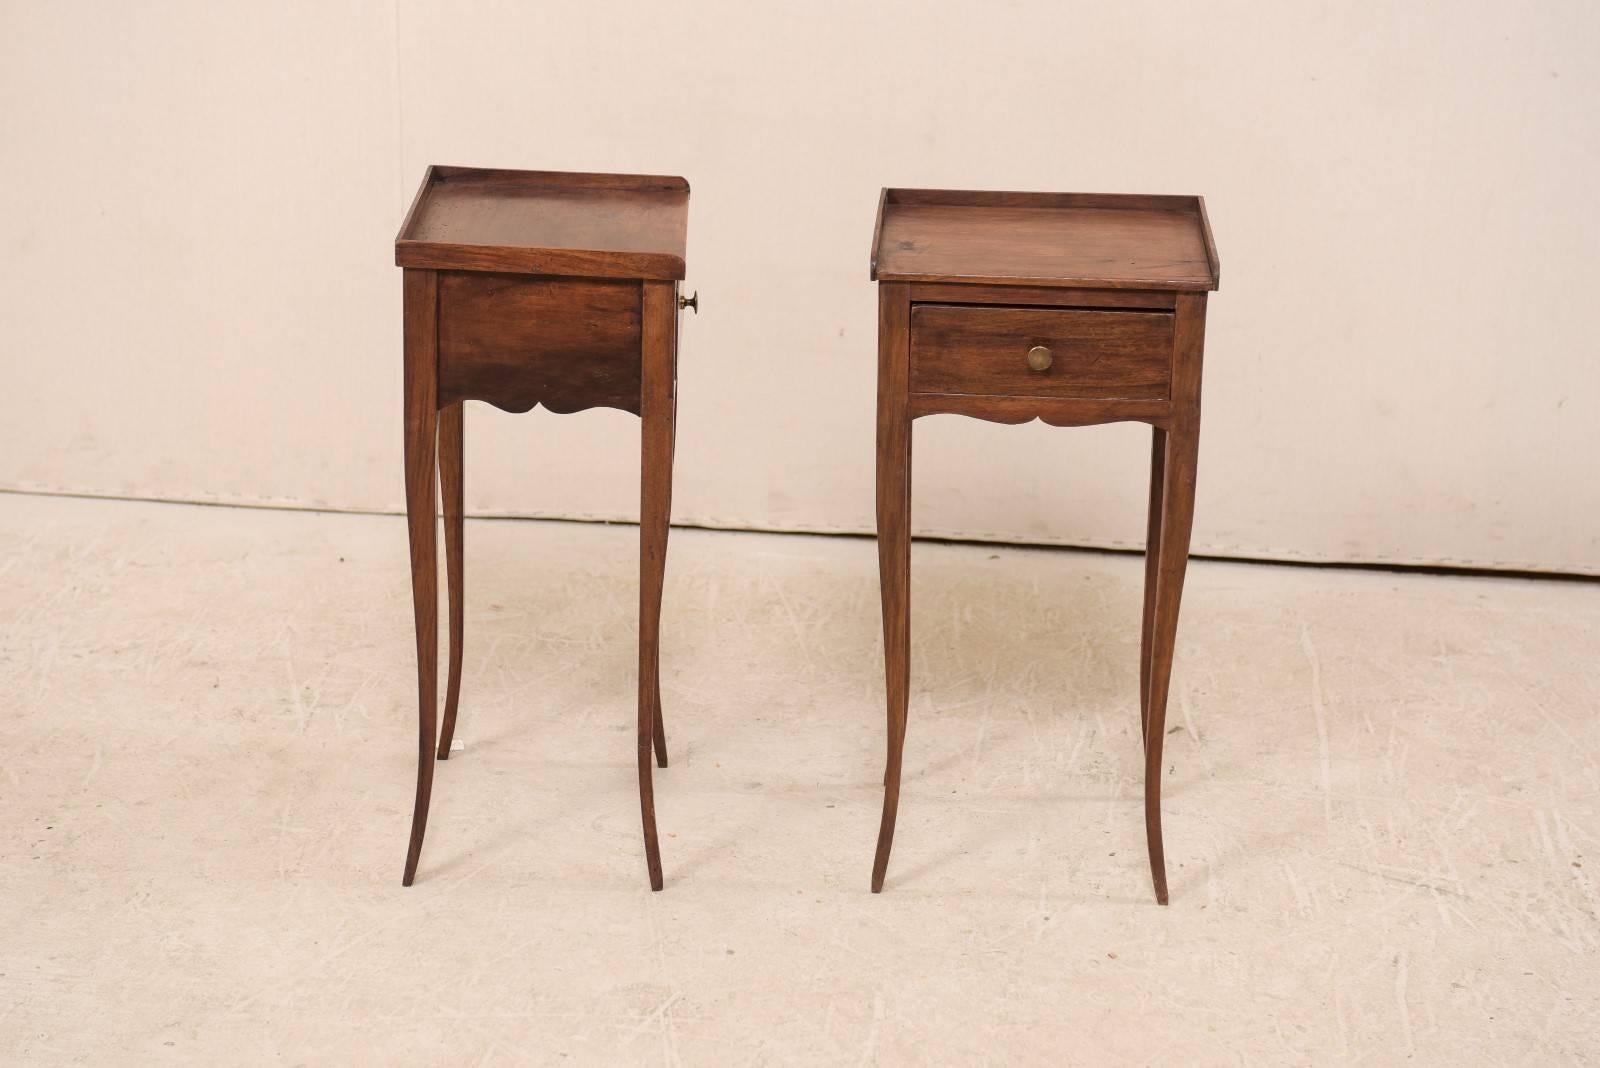 Carved Pair of Cute-Sized French Side Tables with Drawer and Nice Long Cabriole Legs